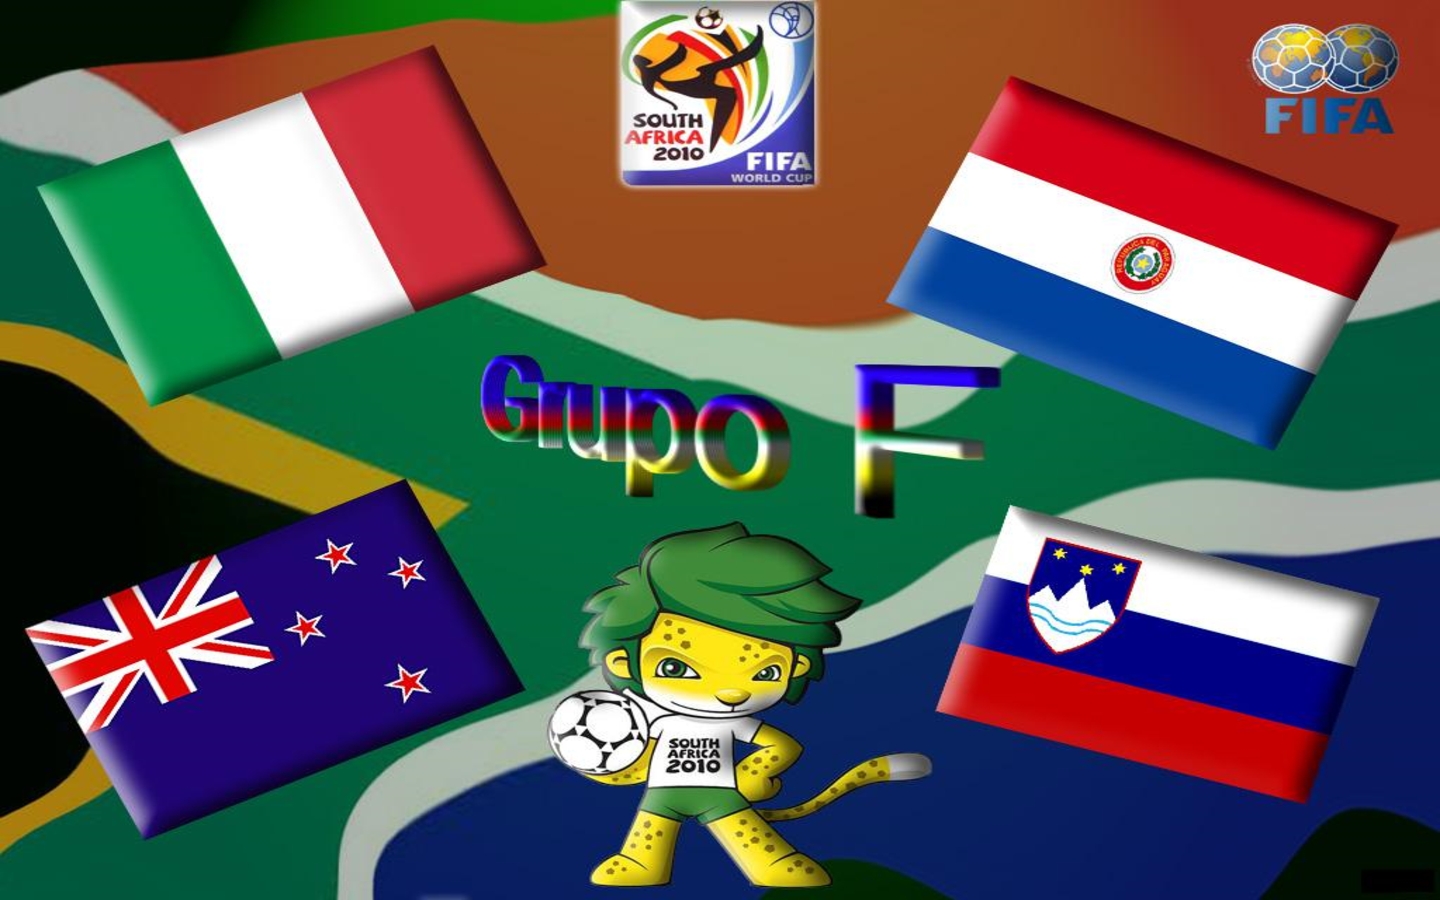 World cup 2010 wallpapers